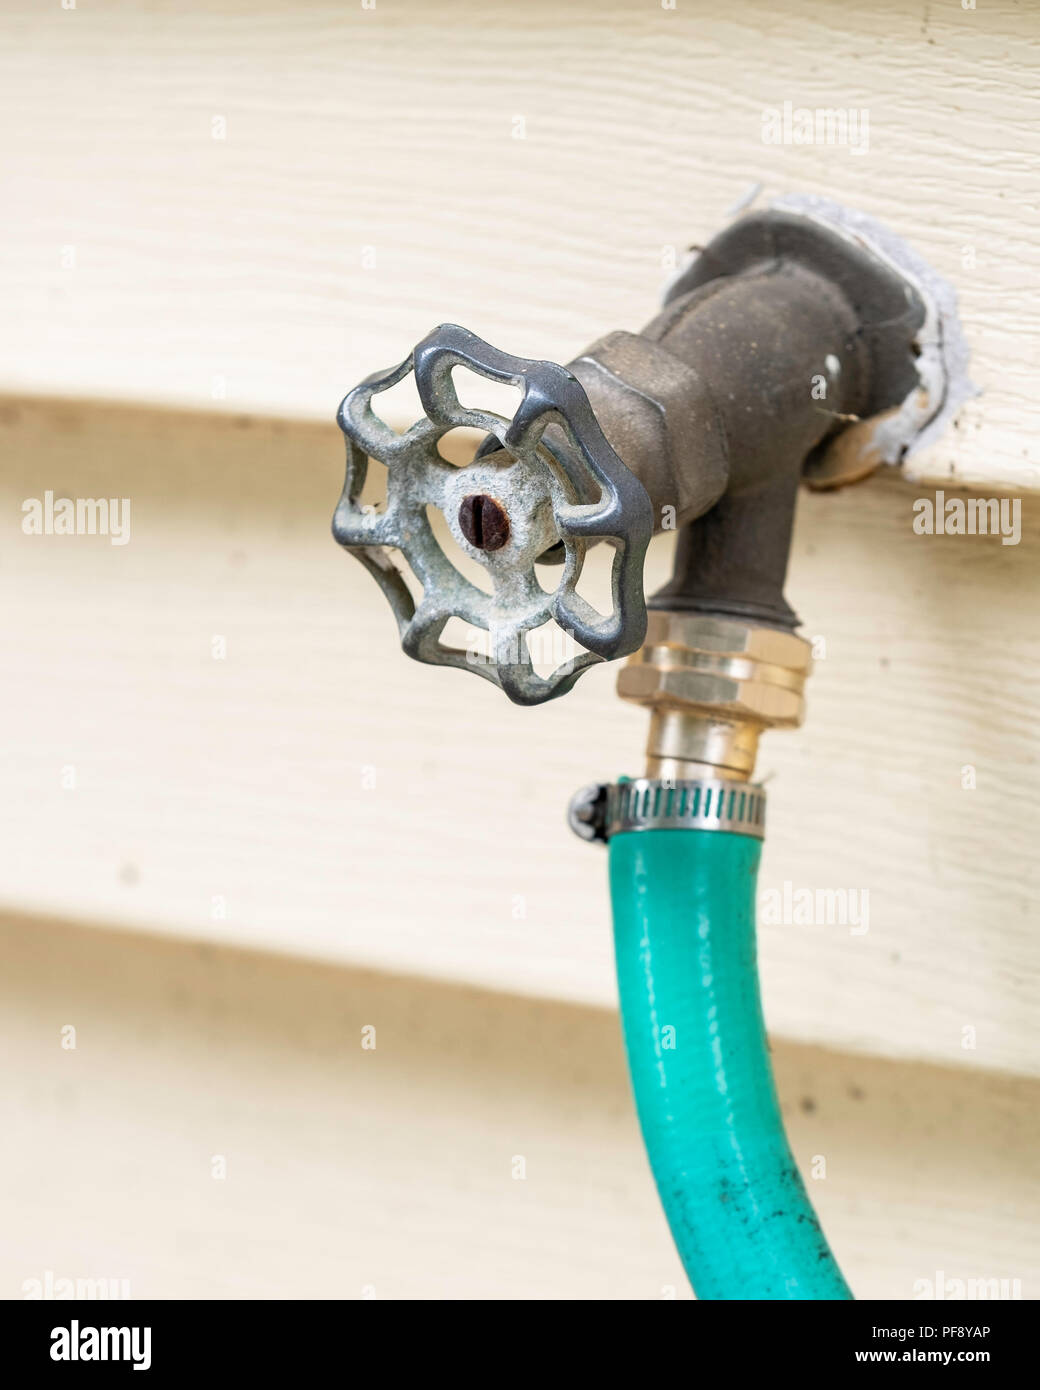 A water spigot connected to the exterior of a house, with a hose connected. USA. Stock Photo